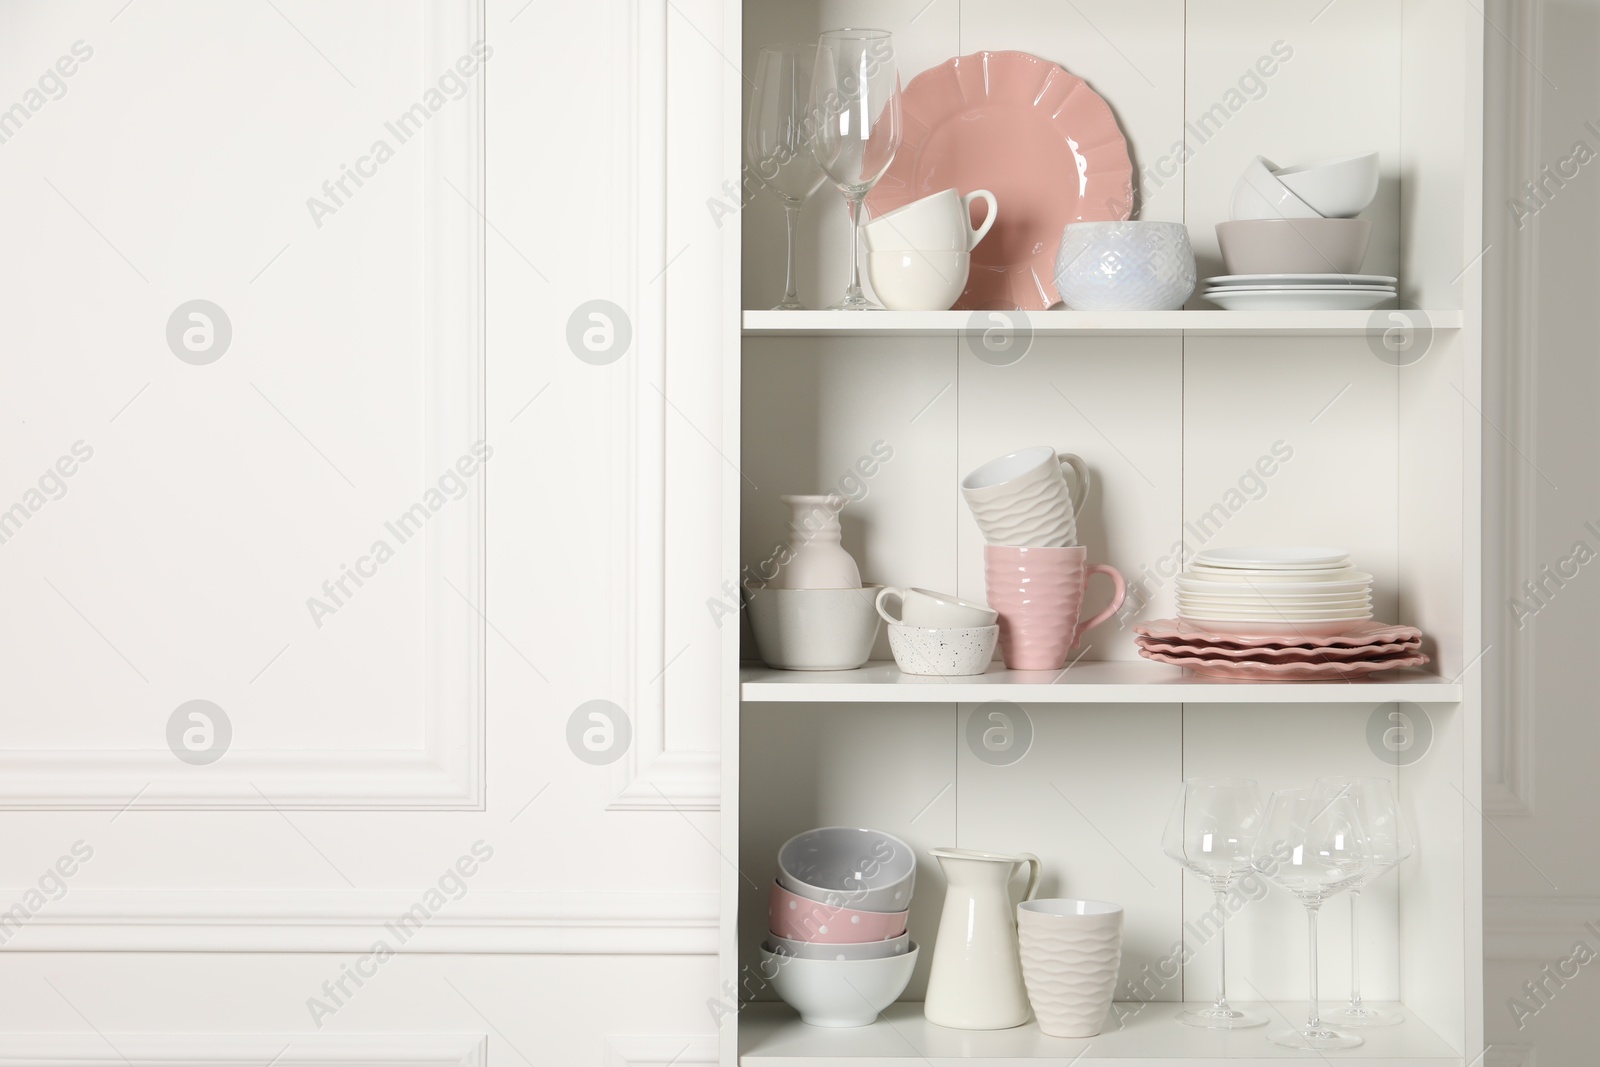 Photo of Different ceramic dishware and glasses on shelves in cabinet indoors. Space for text